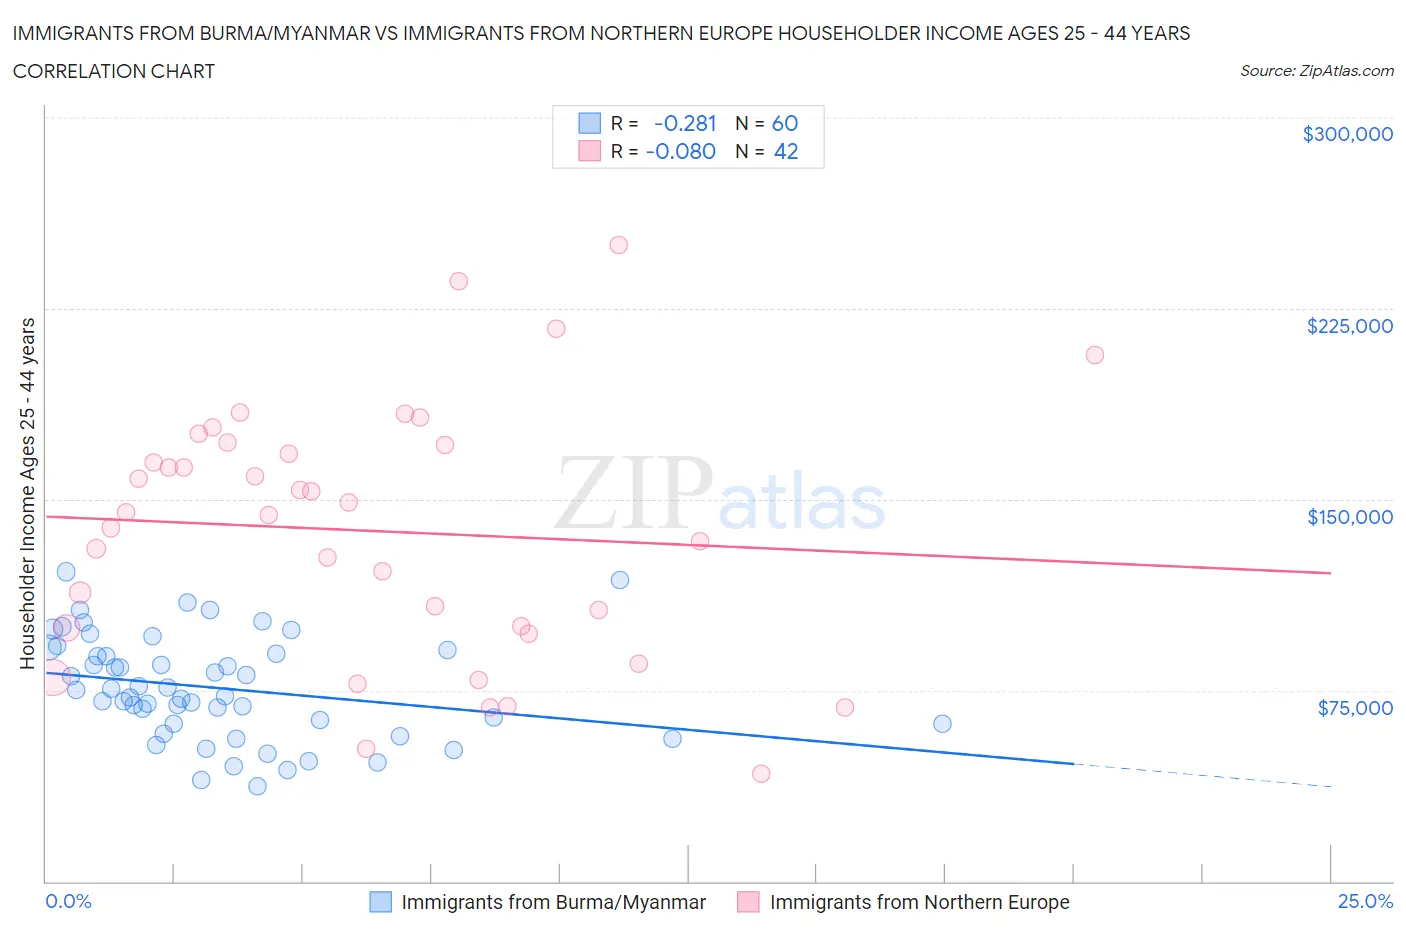 Immigrants from Burma/Myanmar vs Immigrants from Northern Europe Householder Income Ages 25 - 44 years